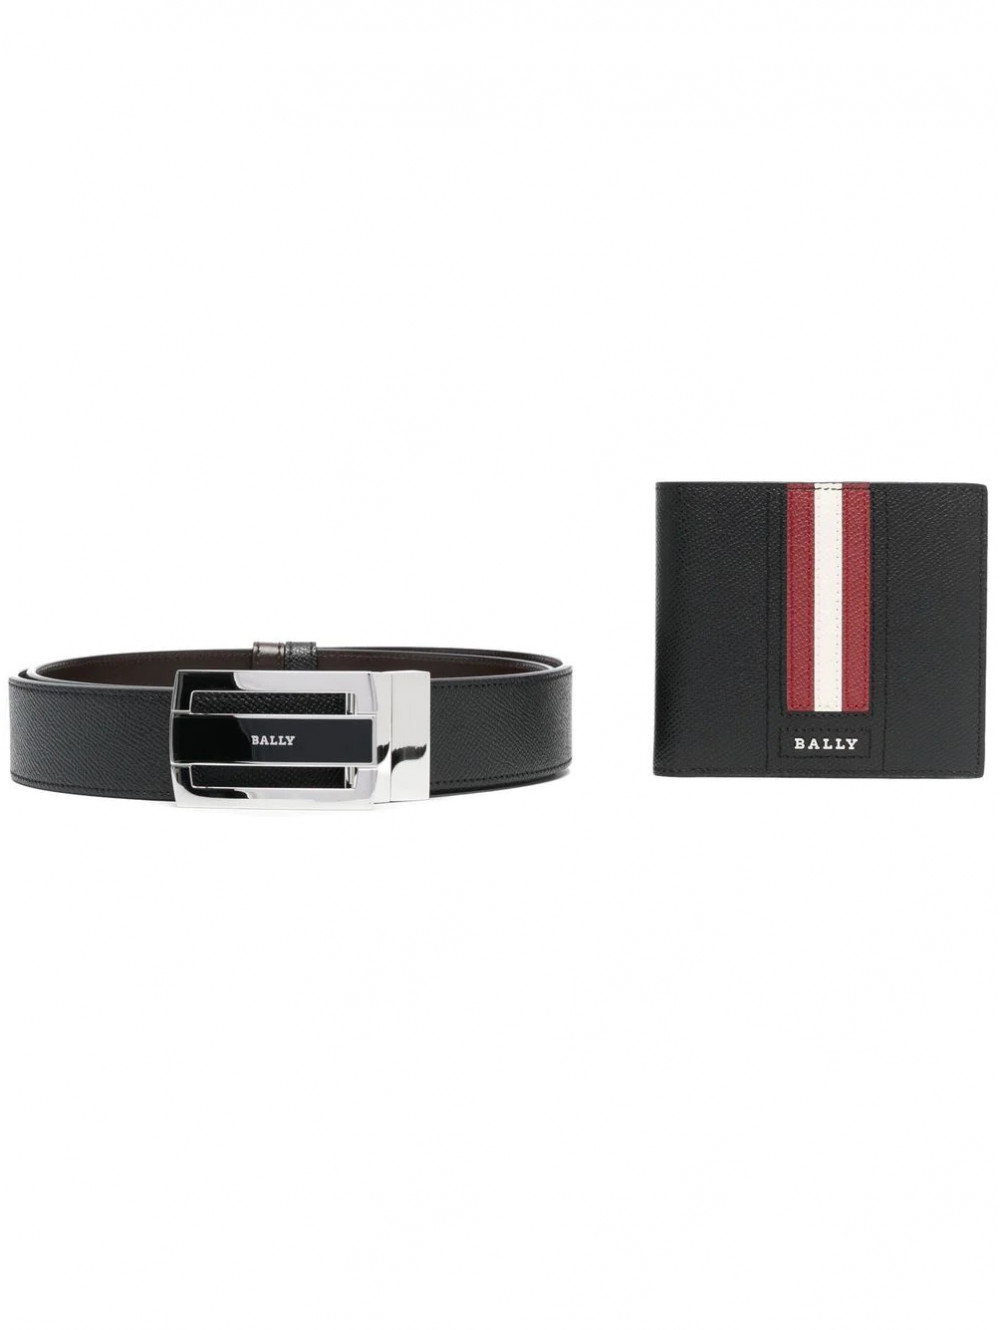 Bally wallet and belt giftbox